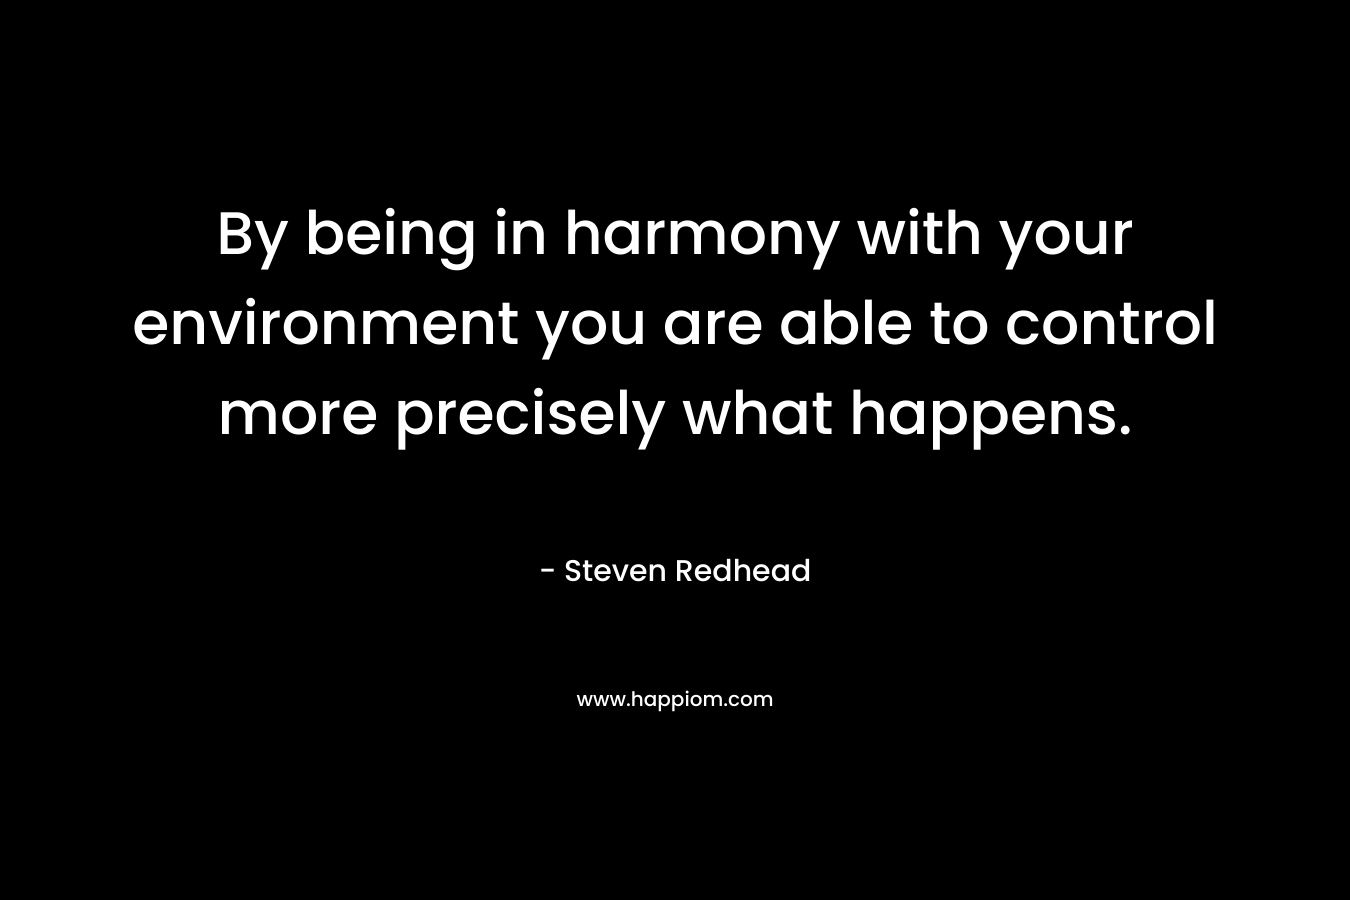 By being in harmony with your environment you are able to control more precisely what happens. – Steven Redhead